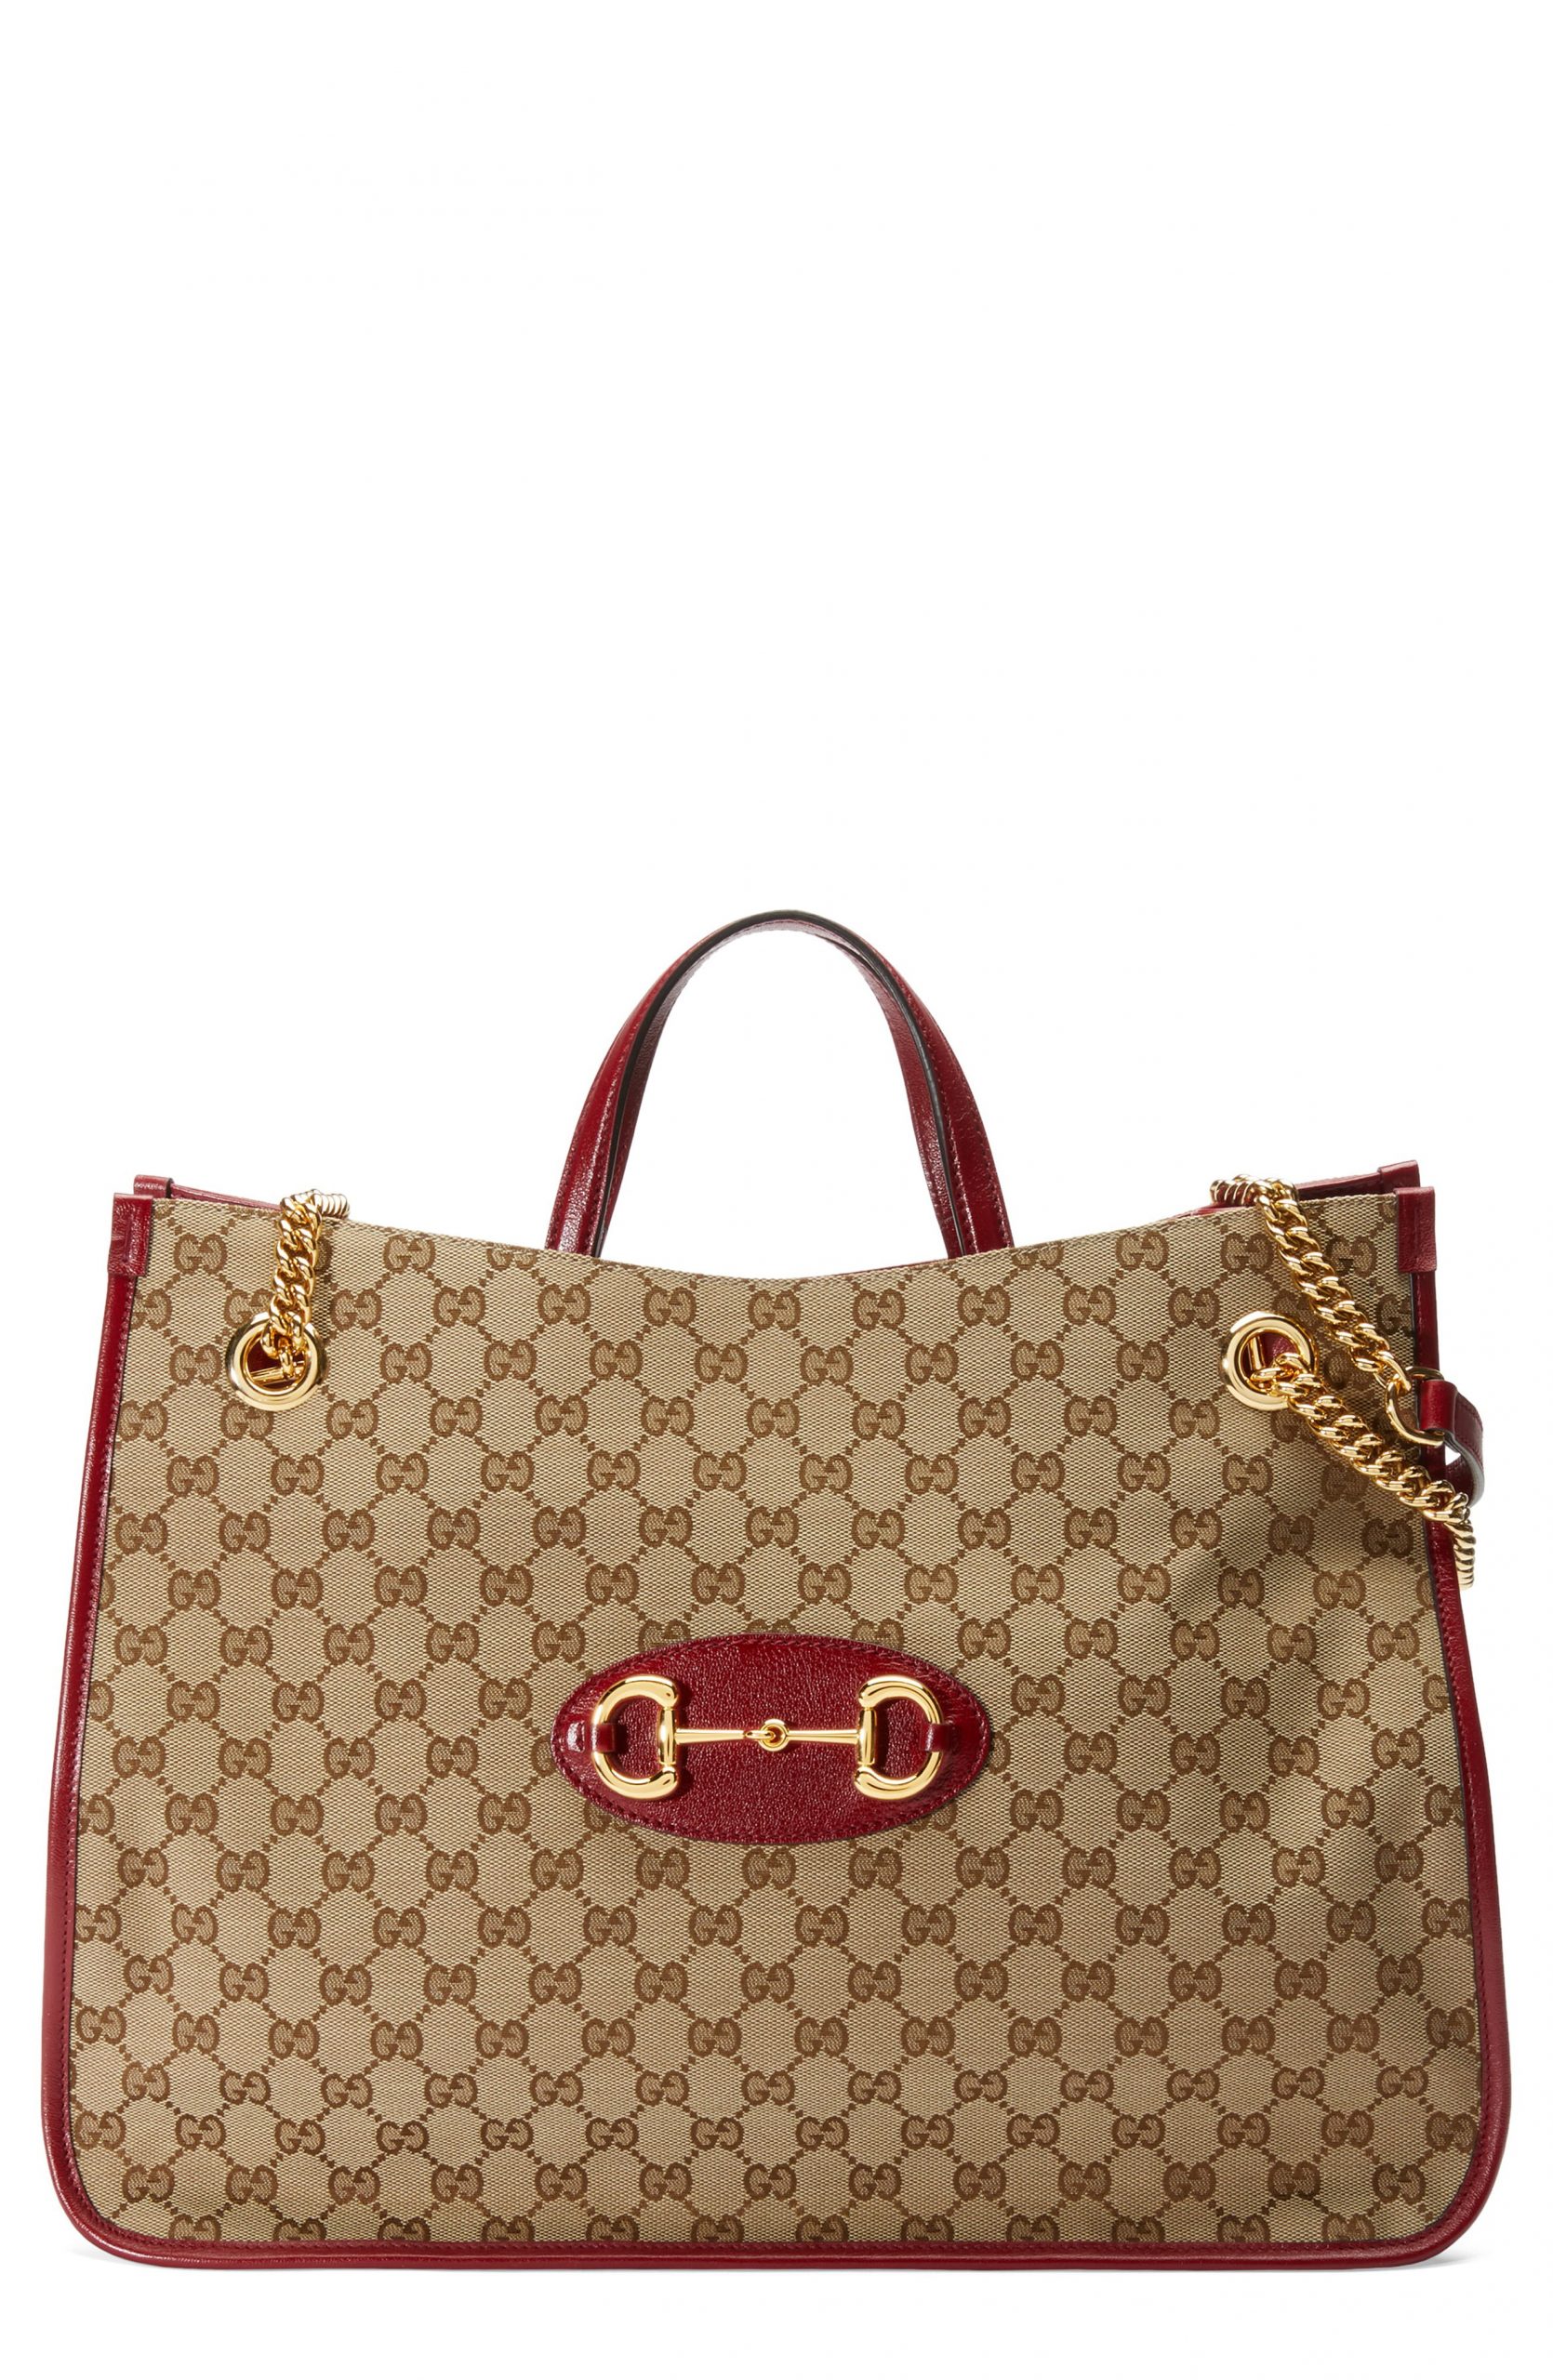 A Timeless Classic Icon: Gucci 1955 Horsebit Bag - Her Style Code